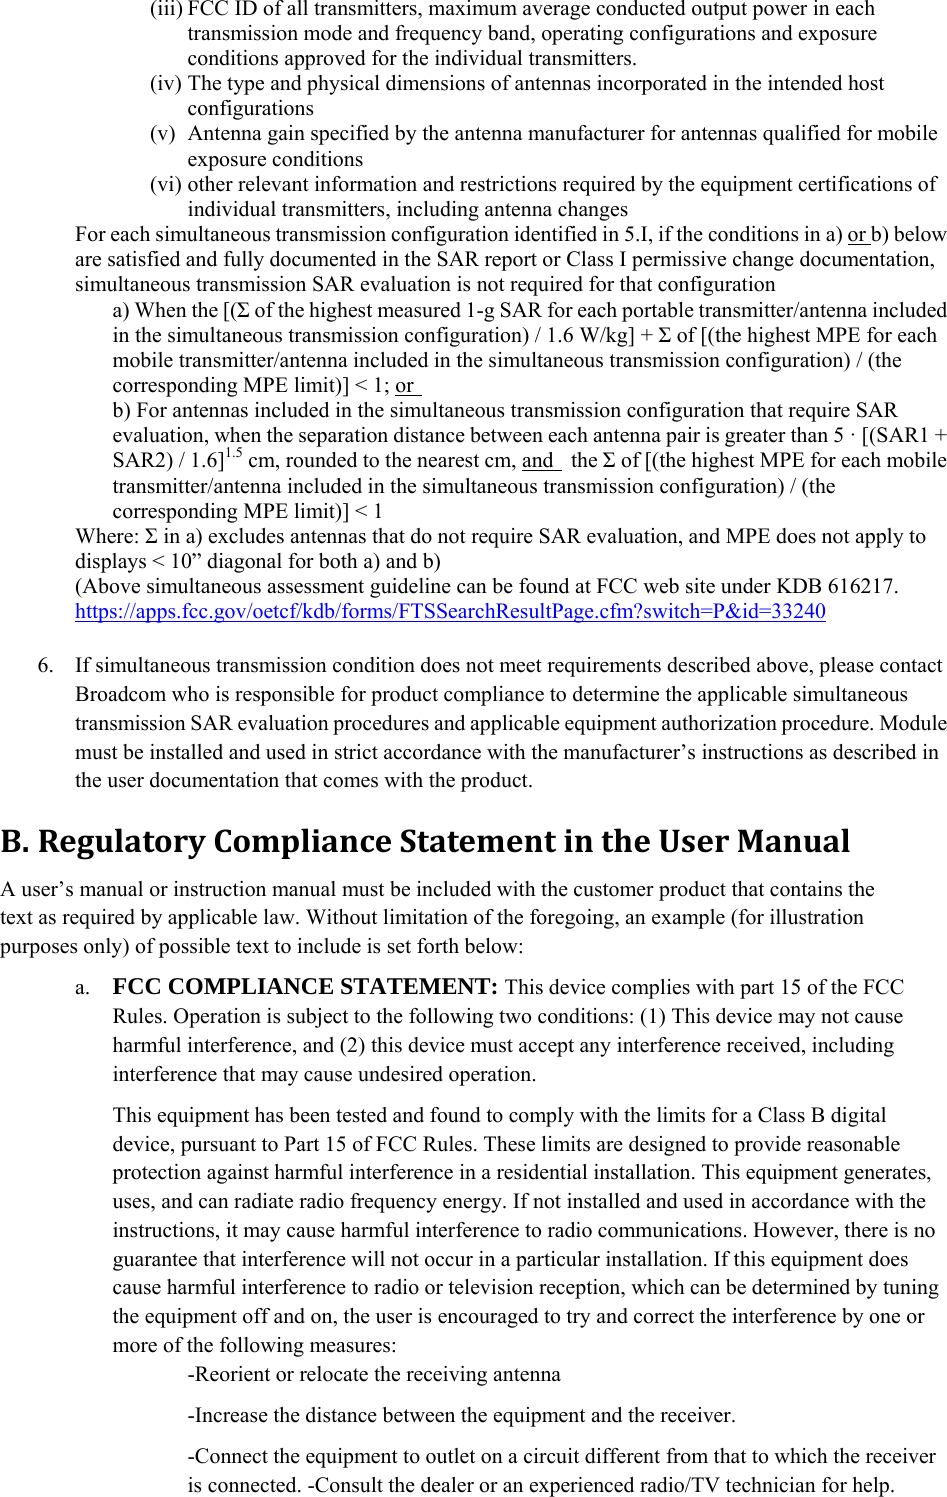 (iii) FCC ID of all transmitters, maximum average conducted output power in each transmission mode and frequency band, operating configurations and exposure conditions approved for the individual transmitters. (iv) The type and physical dimensions of antennas incorporated in the intended host configurations  (v) Antenna gain specified by the antenna manufacturer for antennas qualified for mobile exposure conditions   (vi) other relevant information and restrictions required by the equipment certifications of individual transmitters, including antenna changes For each simultaneous transmission configuration identified in 5.I, if the conditions in a) or b) below are satisfied and fully documented in the SAR report or Class I permissive change documentation, simultaneous transmission SAR evaluation is not required for that configuration   a) When the [(Σ of the highest measured 1-g SAR for each portable transmitter/antenna included in the simultaneous transmission configuration) / 1.6 W/kg] + Σ of [(the highest MPE for each mobile transmitter/antenna included in the simultaneous transmission configuration) / (the corresponding MPE limit)] &lt; 1; or   b) For antennas included in the simultaneous transmission configuration that require SAR evaluation, when the separation distance between each antenna pair is greater than 5 · [(SAR1 + SAR2) / 1.6]1.5 cm, rounded to the nearest cm, and  the Σ of [(the highest MPE for each mobile transmitter/antenna included in the simultaneous transmission configuration) / (the corresponding MPE limit)] &lt; 1   Where: Σ in a) excludes antennas that do not require SAR evaluation, and MPE does not apply to displays &lt; 10” diagonal for both a) and b) (Above simultaneous assessment guideline can be found at FCC web site under KDB 616217. https://apps.fcc.gov/oetcf/kdb/forms/FTSSearchResultPage.cfm?switch=P&amp;id=33240  6. If simultaneous transmission condition does not meet requirements described above, please contact Broadcom who is responsible for product compliance to determine the applicable simultaneous transmission SAR evaluation procedures and applicable equipment authorization procedure. Module must be installed and used in strict accordance with the manufacturer’s instructions as described in the user documentation that comes with the product.     B. RegulatoryComplianceStatementintheUserManualA user’s manual or instruction manual must be included with the customer product that contains the text as required by applicable law. Without limitation of the foregoing, an example (for illustration purposes only) of possible text to include is set forth below: a. FCC COMPLIANCE STATEMENT: This device complies with part 15 of the FCC Rules. Operation is subject to the following two conditions: (1) This device may not cause harmful interference, and (2) this device must accept any interference received, including interference that may cause undesired operation.   This equipment has been tested and found to comply with the limits for a Class B digital device, pursuant to Part 15 of FCC Rules. These limits are designed to provide reasonable protection against harmful interference in a residential installation. This equipment generates, uses, and can radiate radio frequency energy. If not installed and used in accordance with the instructions, it may cause harmful interference to radio communications. However, there is no guarantee that interference will not occur in a particular installation. If this equipment does cause harmful interference to radio or television reception, which can be determined by tuning the equipment off and on, the user is encouraged to try and correct the interference by one or more of the following measures:     -Reorient or relocate the receiving antenna   -Increase the distance between the equipment and the receiver. -Connect the equipment to outlet on a circuit different from that to which the receiver is connected. -Consult the dealer or an experienced radio/TV technician for help.   